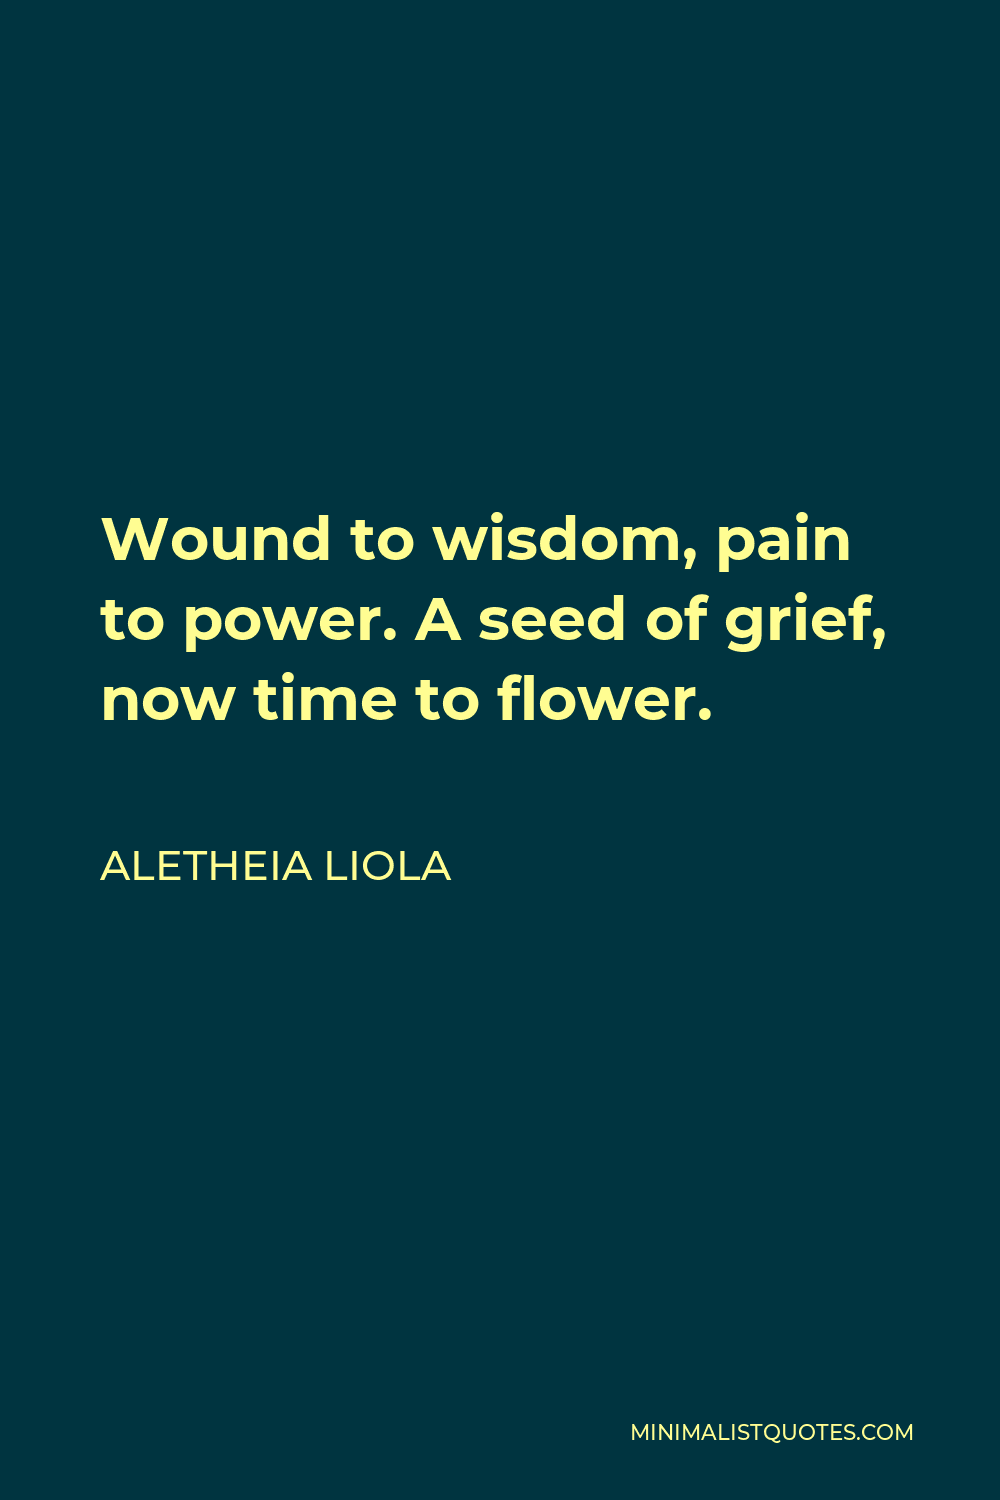 Aletheia Liola Quote - Wound to wisdom, pain to power. A seed of grief, now time to flower.